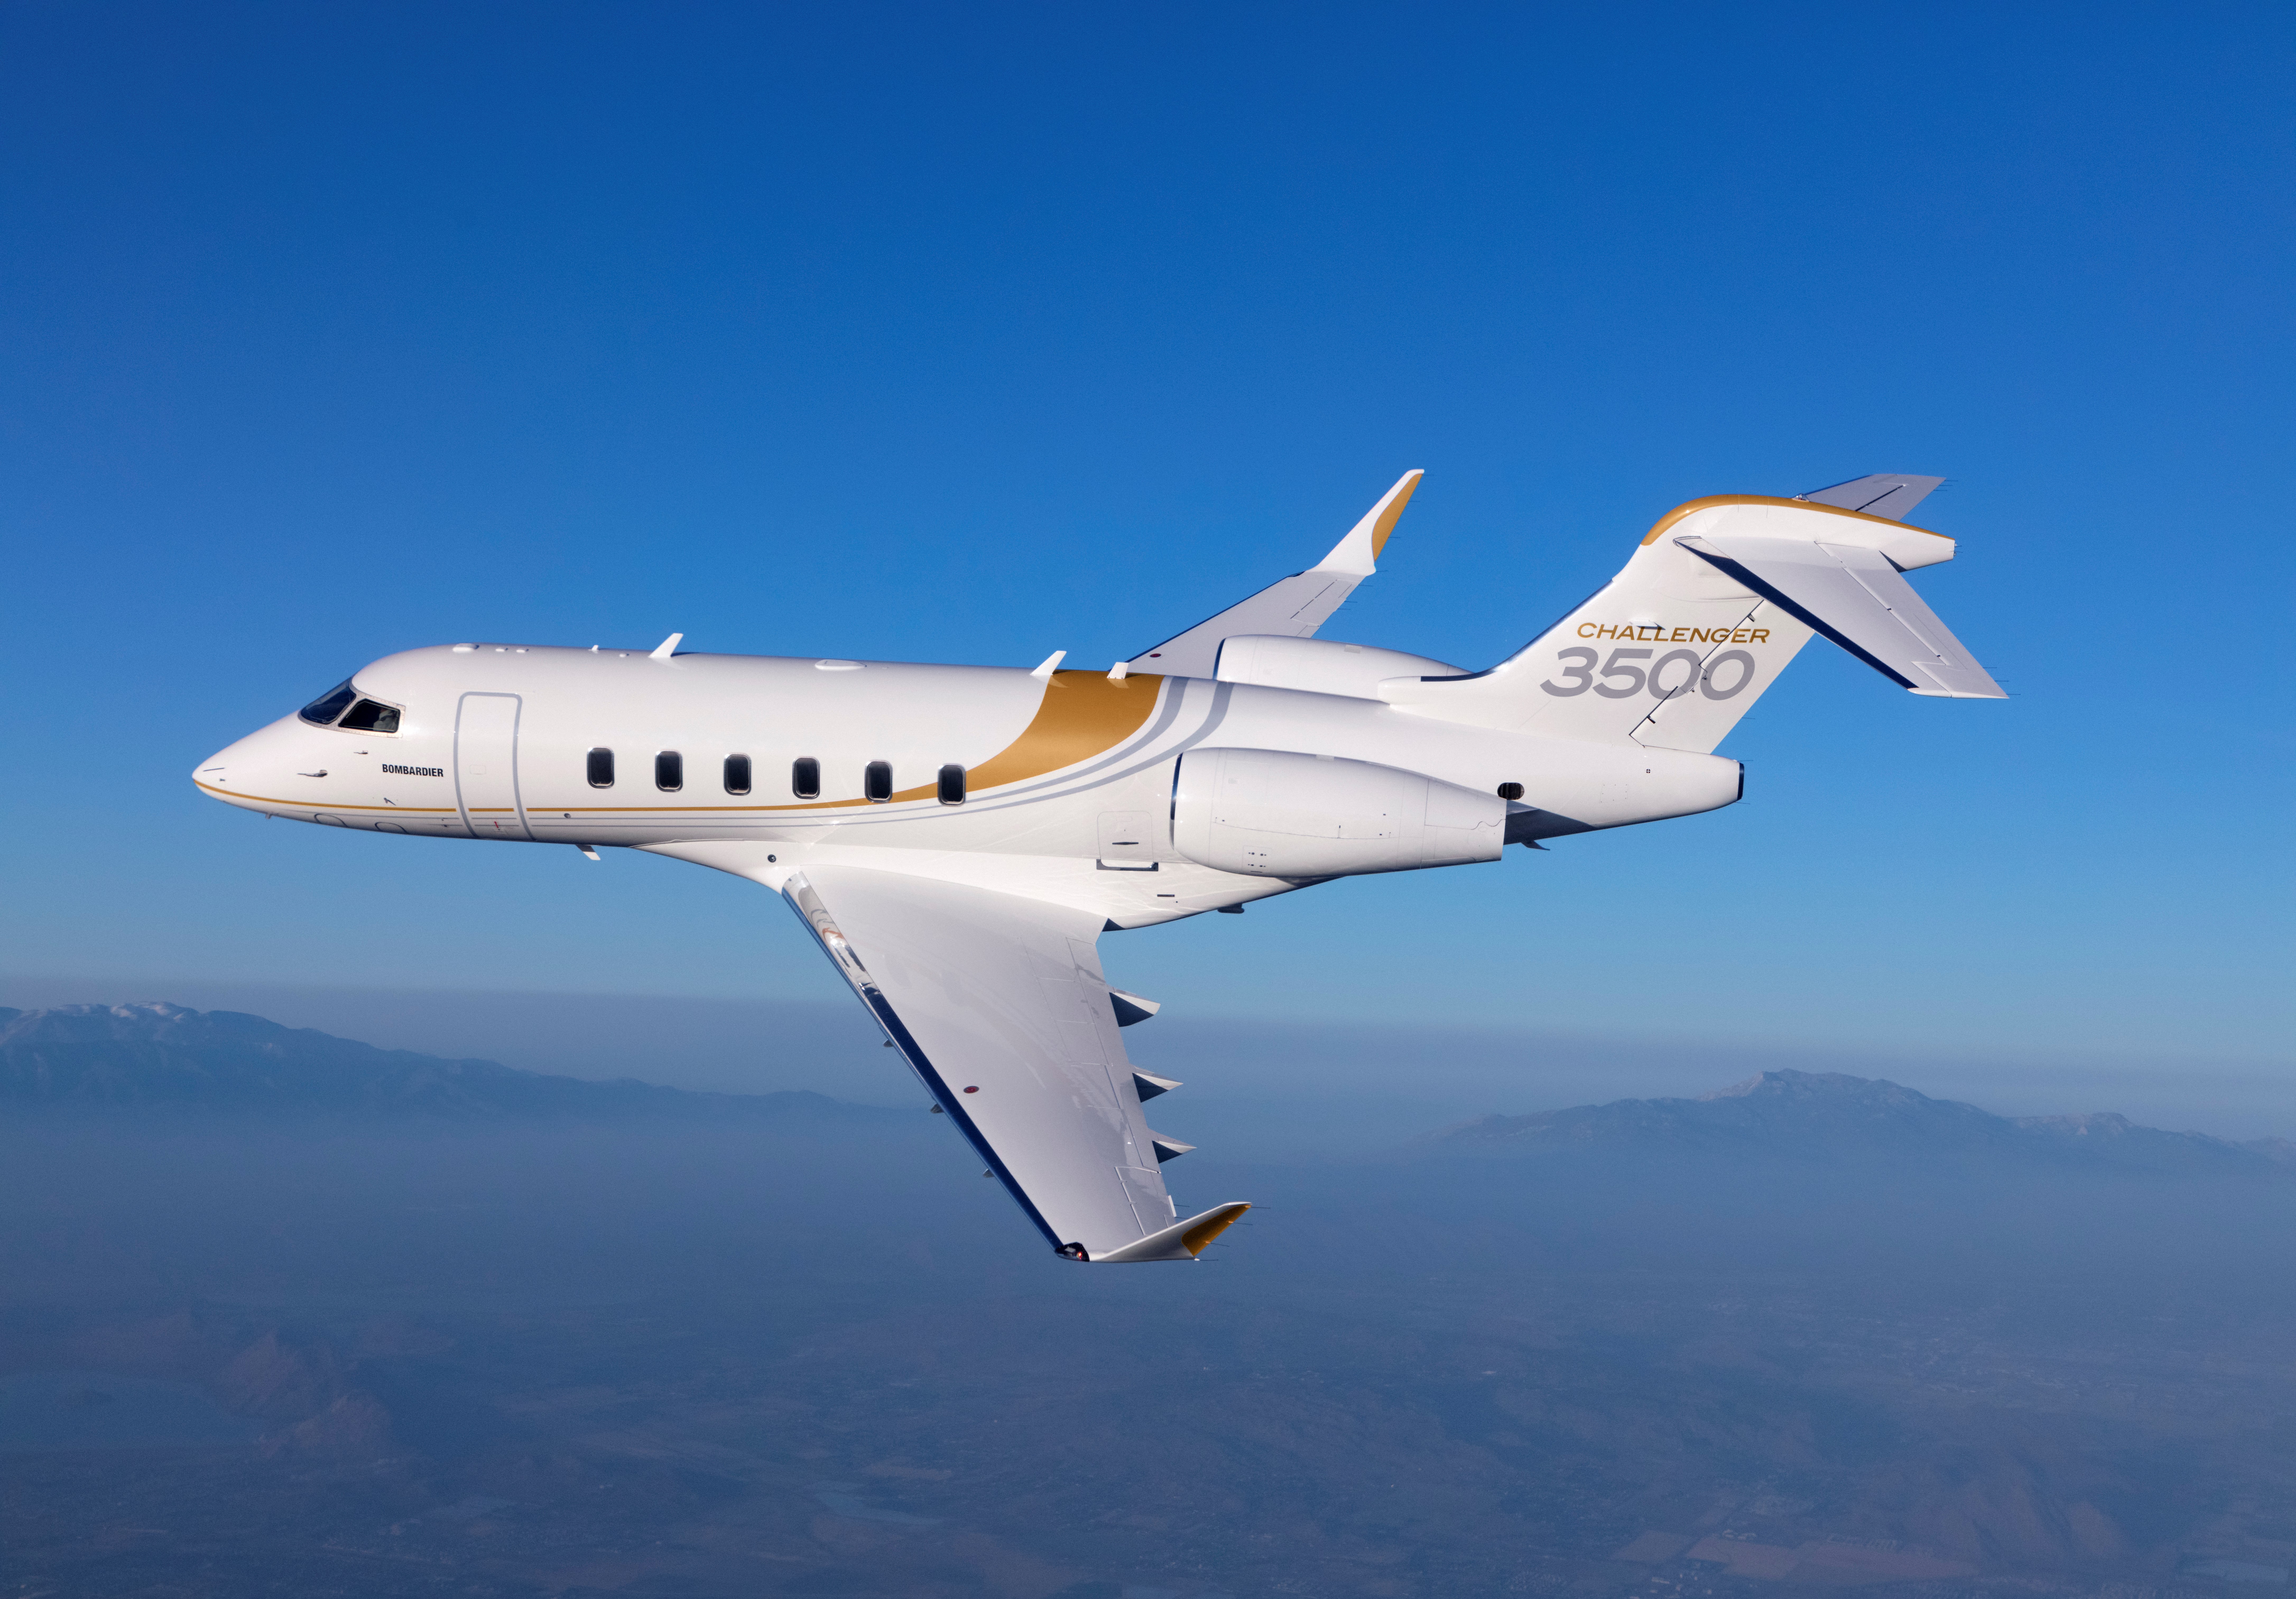 Bombardier's new Challenger 3500 aircraft